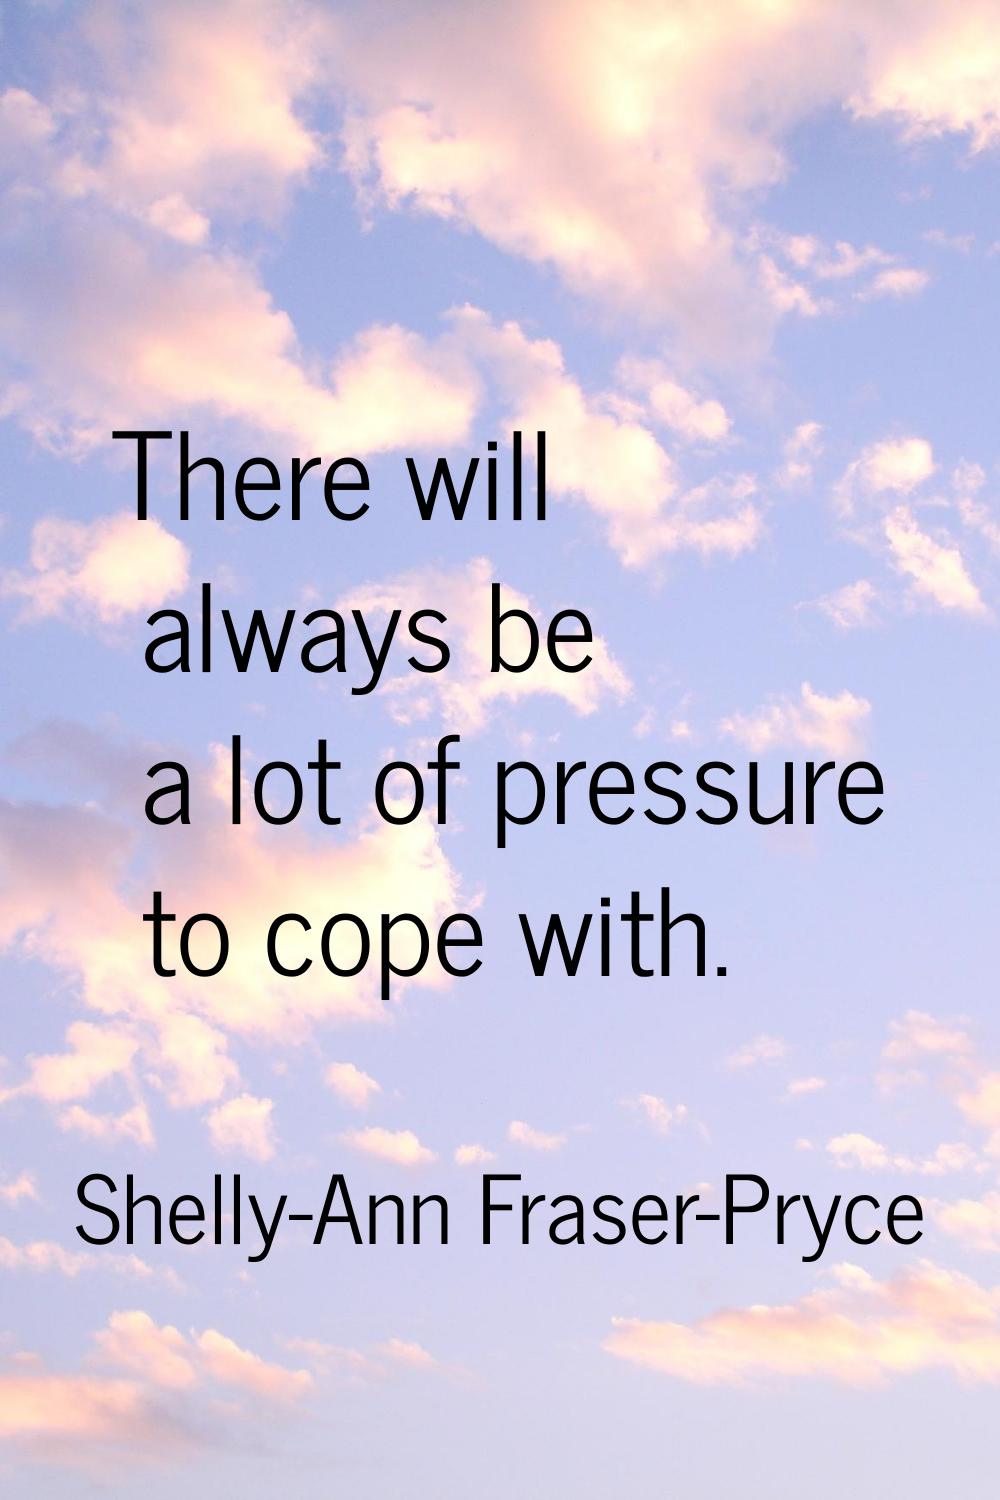 There will always be a lot of pressure to cope with.